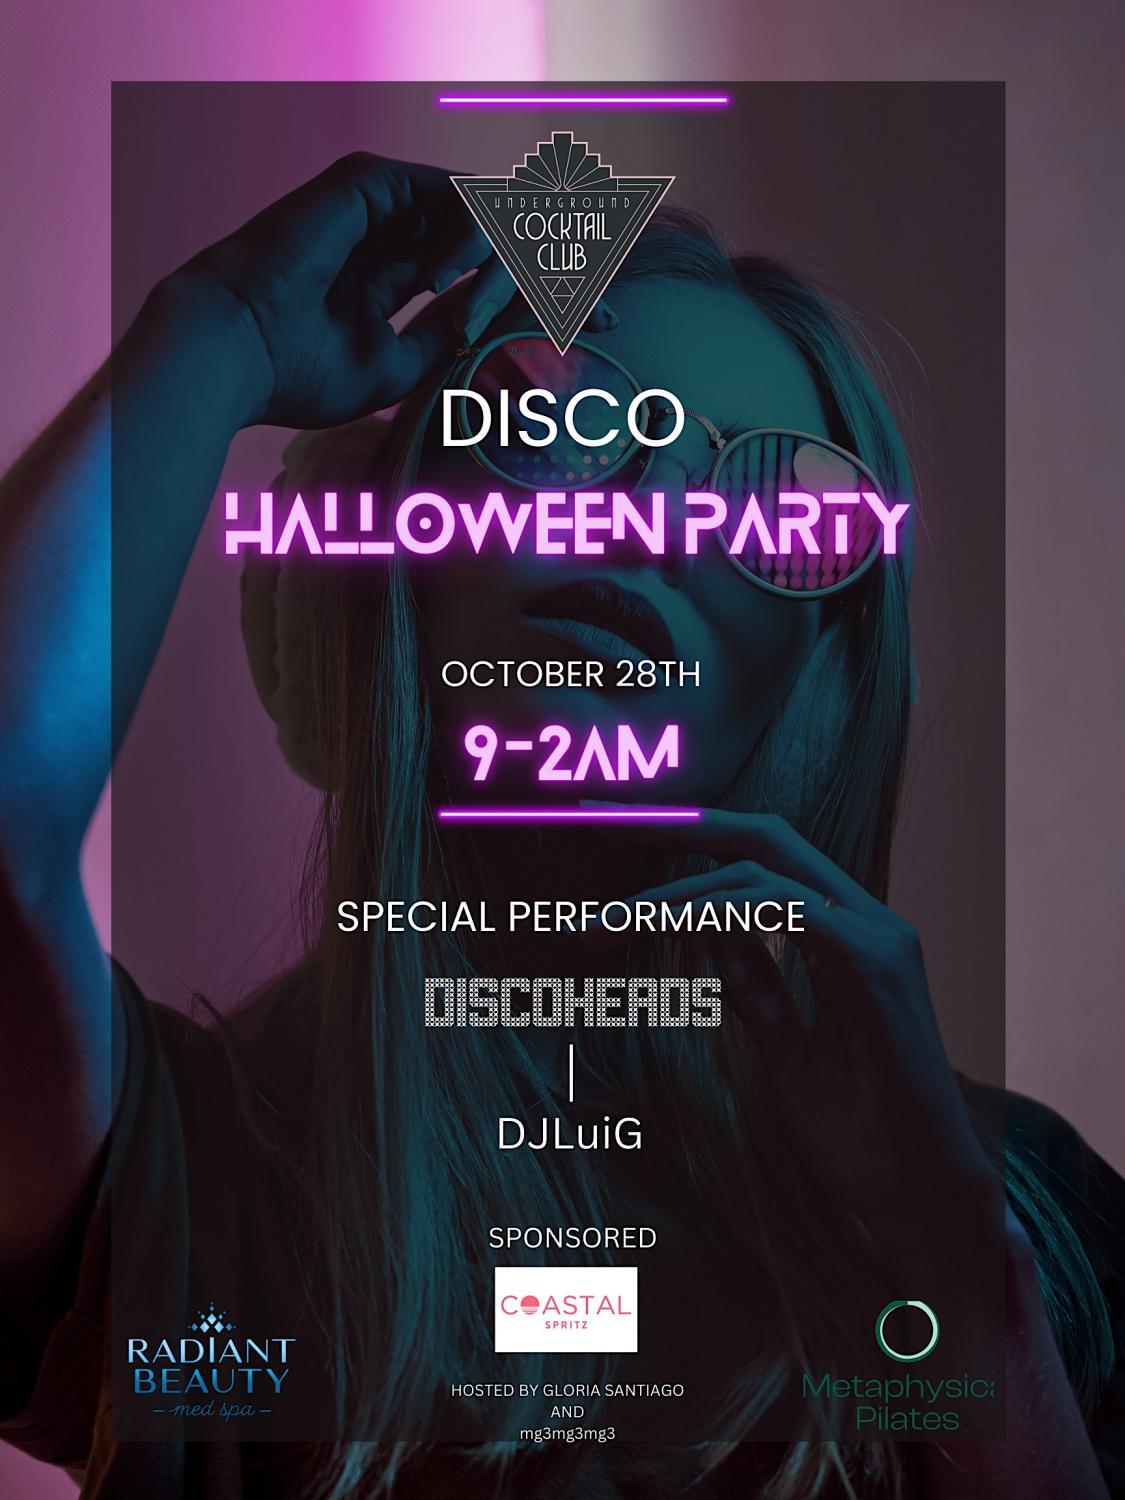 Disco Halloween Party!! Sponsor By Mamitas Tequila
Thu Oct 27, 9:00 PM - Fri Oct 28, 3:00 AM
in 7 days